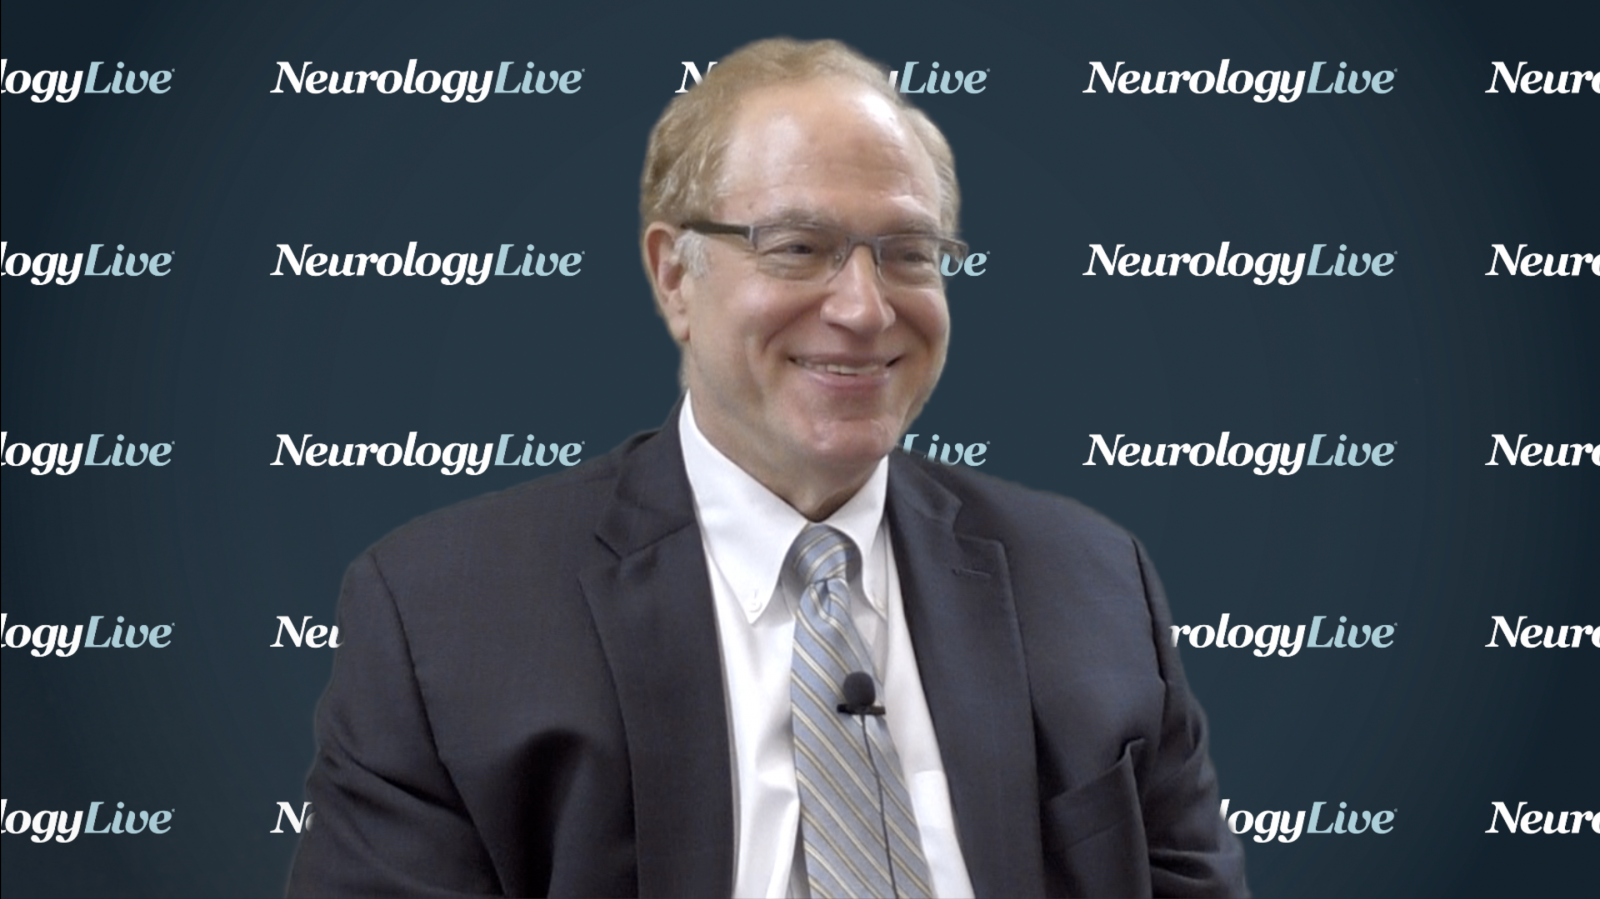 Richard Lipton, MD: Eptinezumab Maintains Reductions in the Impact of Migraine